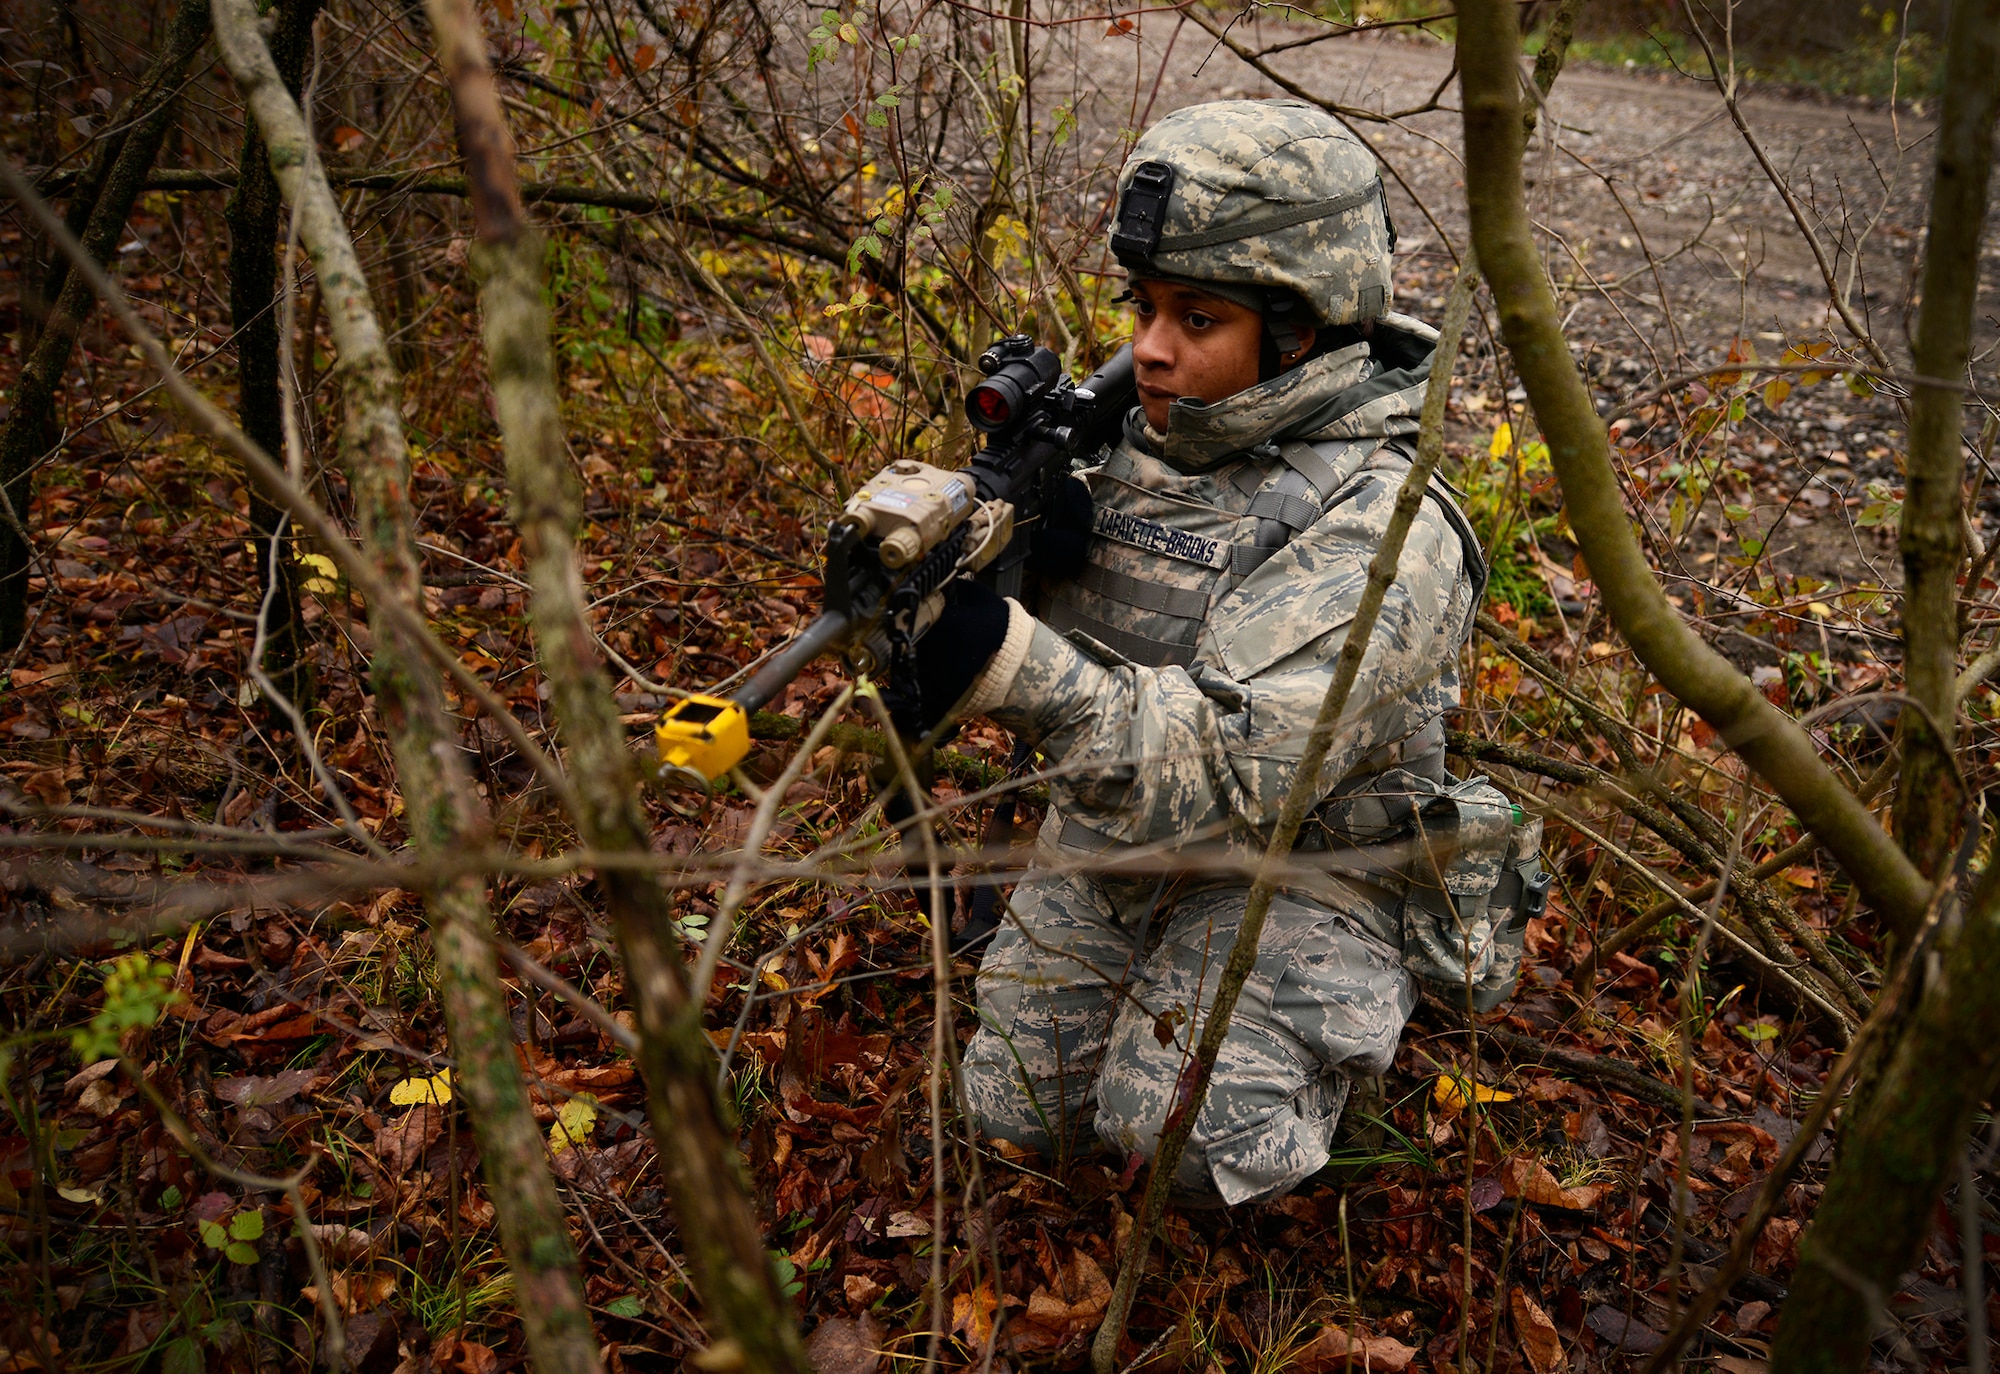 An Airman from the 914th Security Forces Squadron provides security for Airmen of 914th Explosive Ordnance Disposal Squadron during a joint exercise with the 914th Security Forces Squadron, at the Niagara Falls Air Reserve Station N.Y., November 1, 2014. Members of the 914th EOD, along with personnel from the 914th Security Forces Squadron participated in the day-long exercise which combined the unique expeditionary combat skills of each squadron and allowed members the opportunity to observe the other’s practices and procedures. (U.S. Air Force photo by Staff Sgt. Stephanie Sawyer)